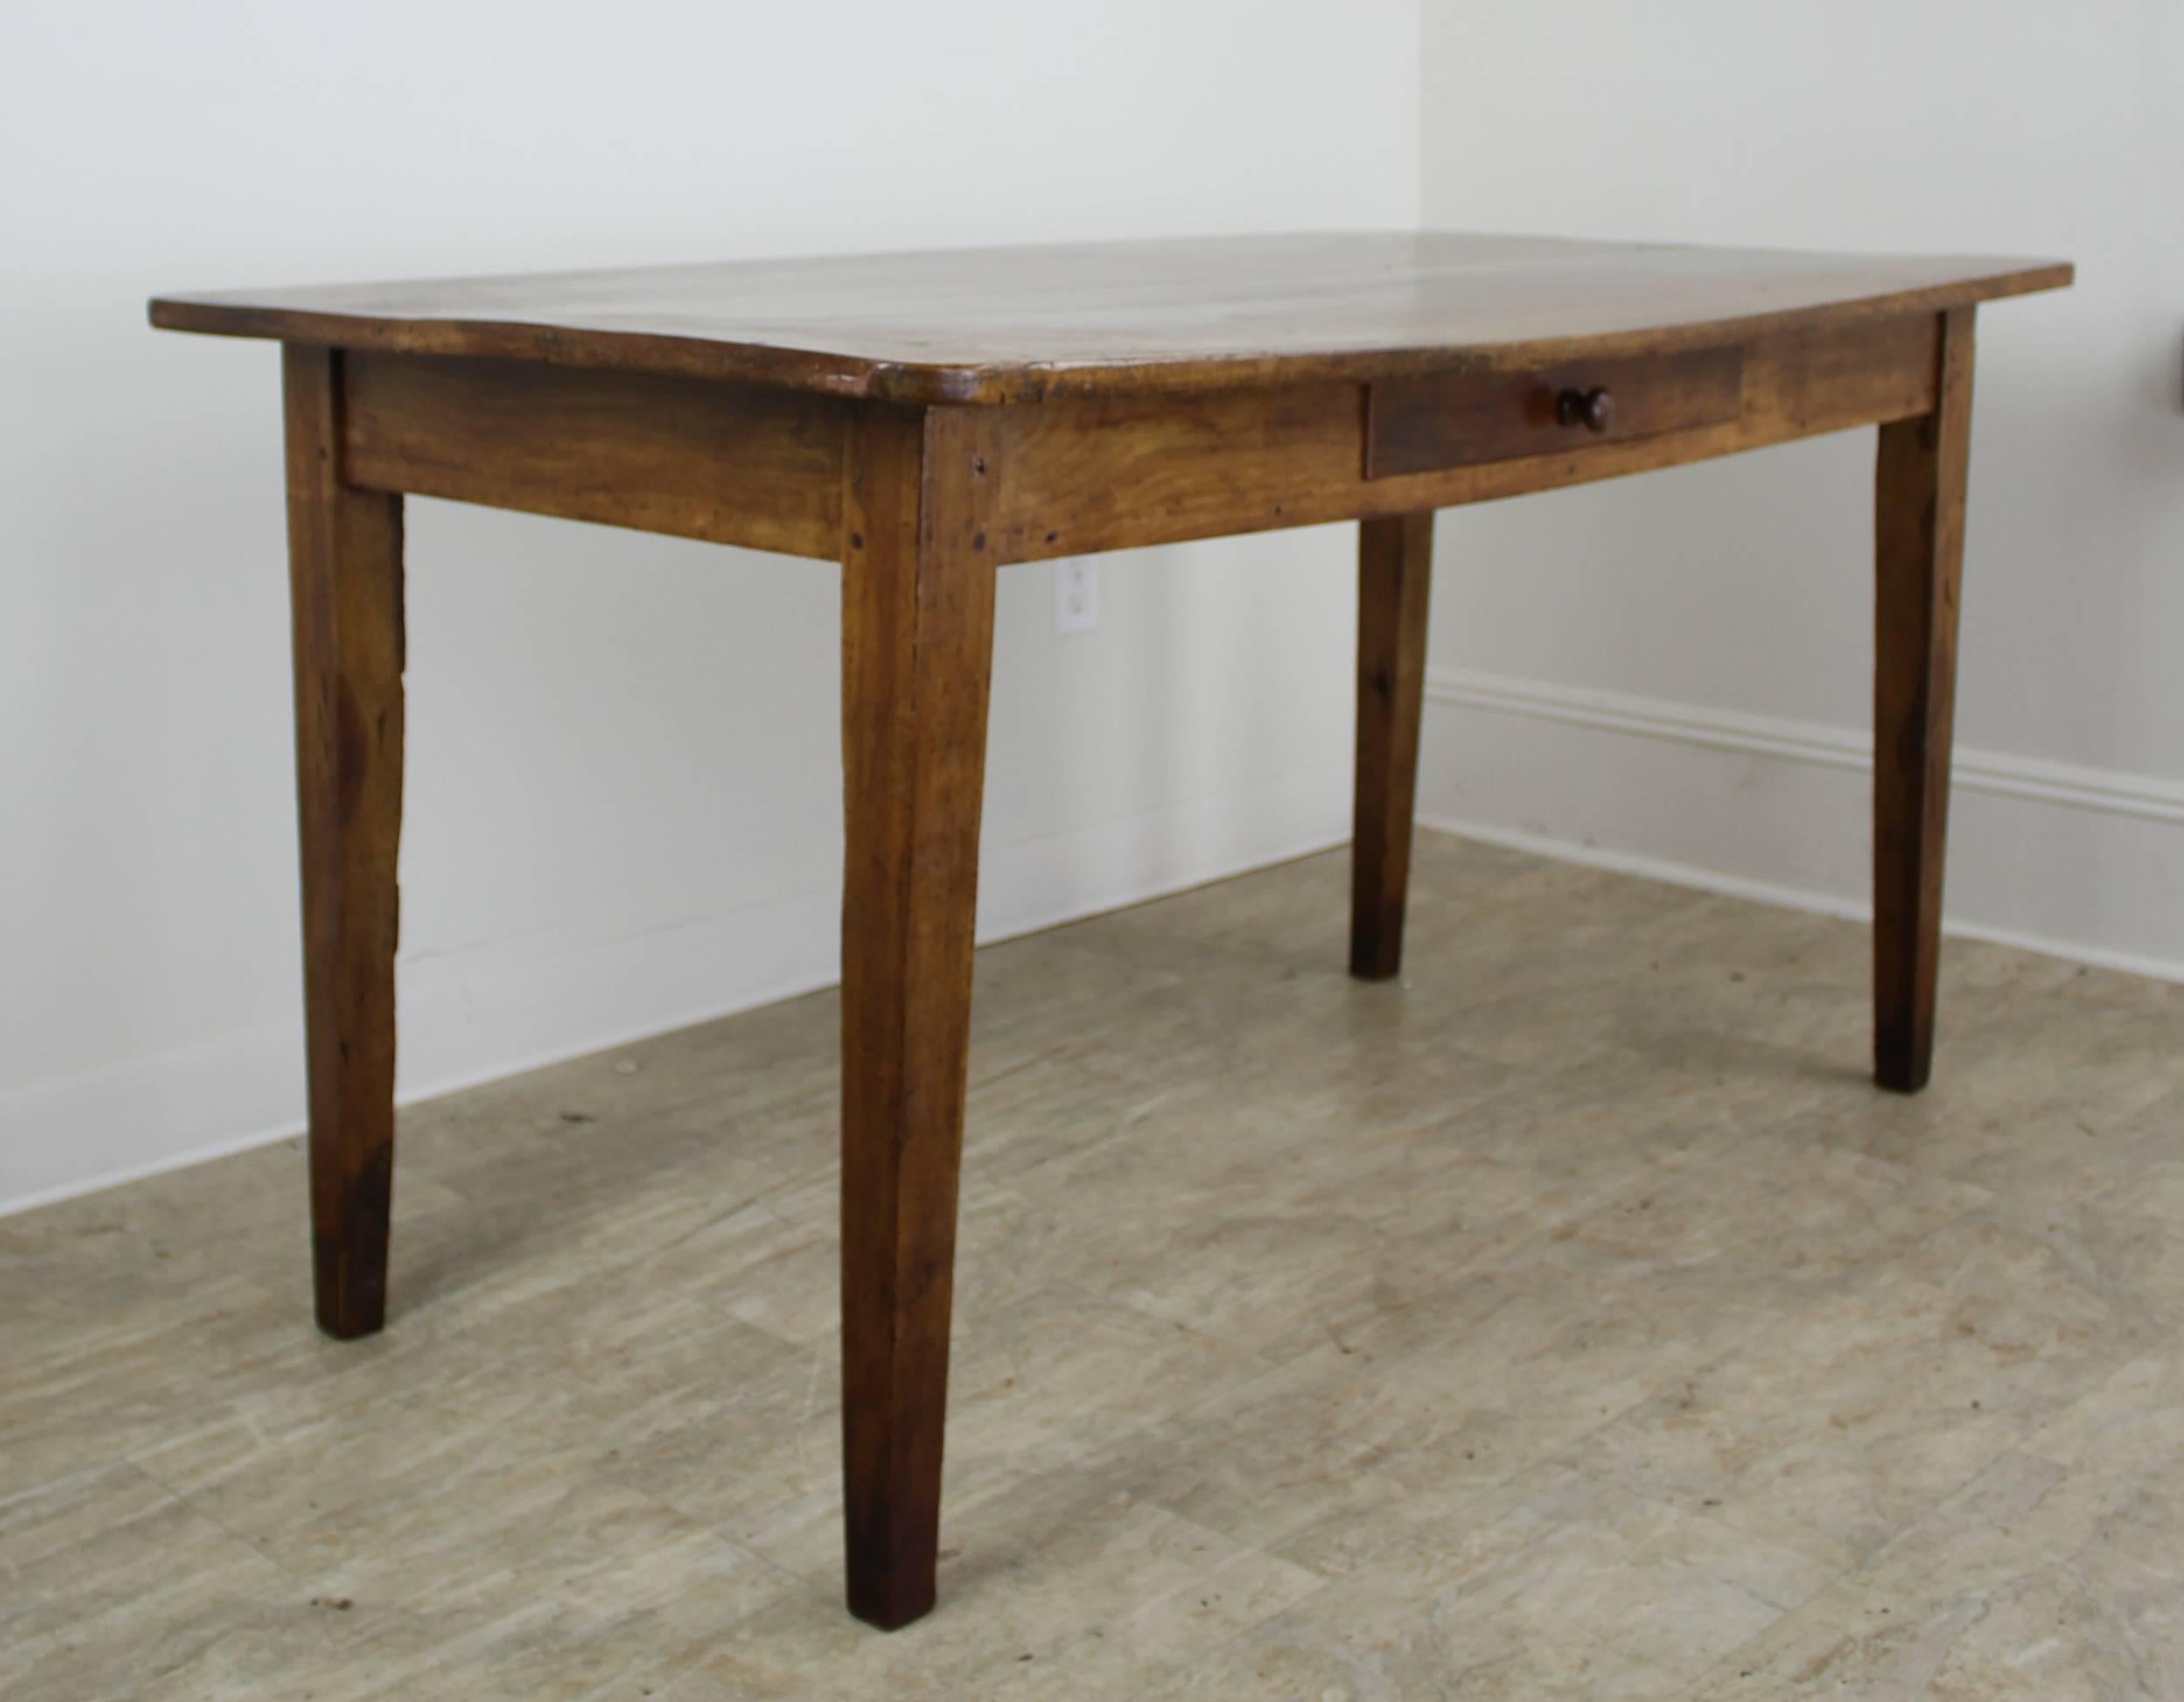 A chunky cherry farm or writing table with lovely color, grain and patina. Pretty tapered legs and a Classic look. There is a slight bow on the top which adds character and does not greatly impact the levelness of the piece. A pencil, placed to one